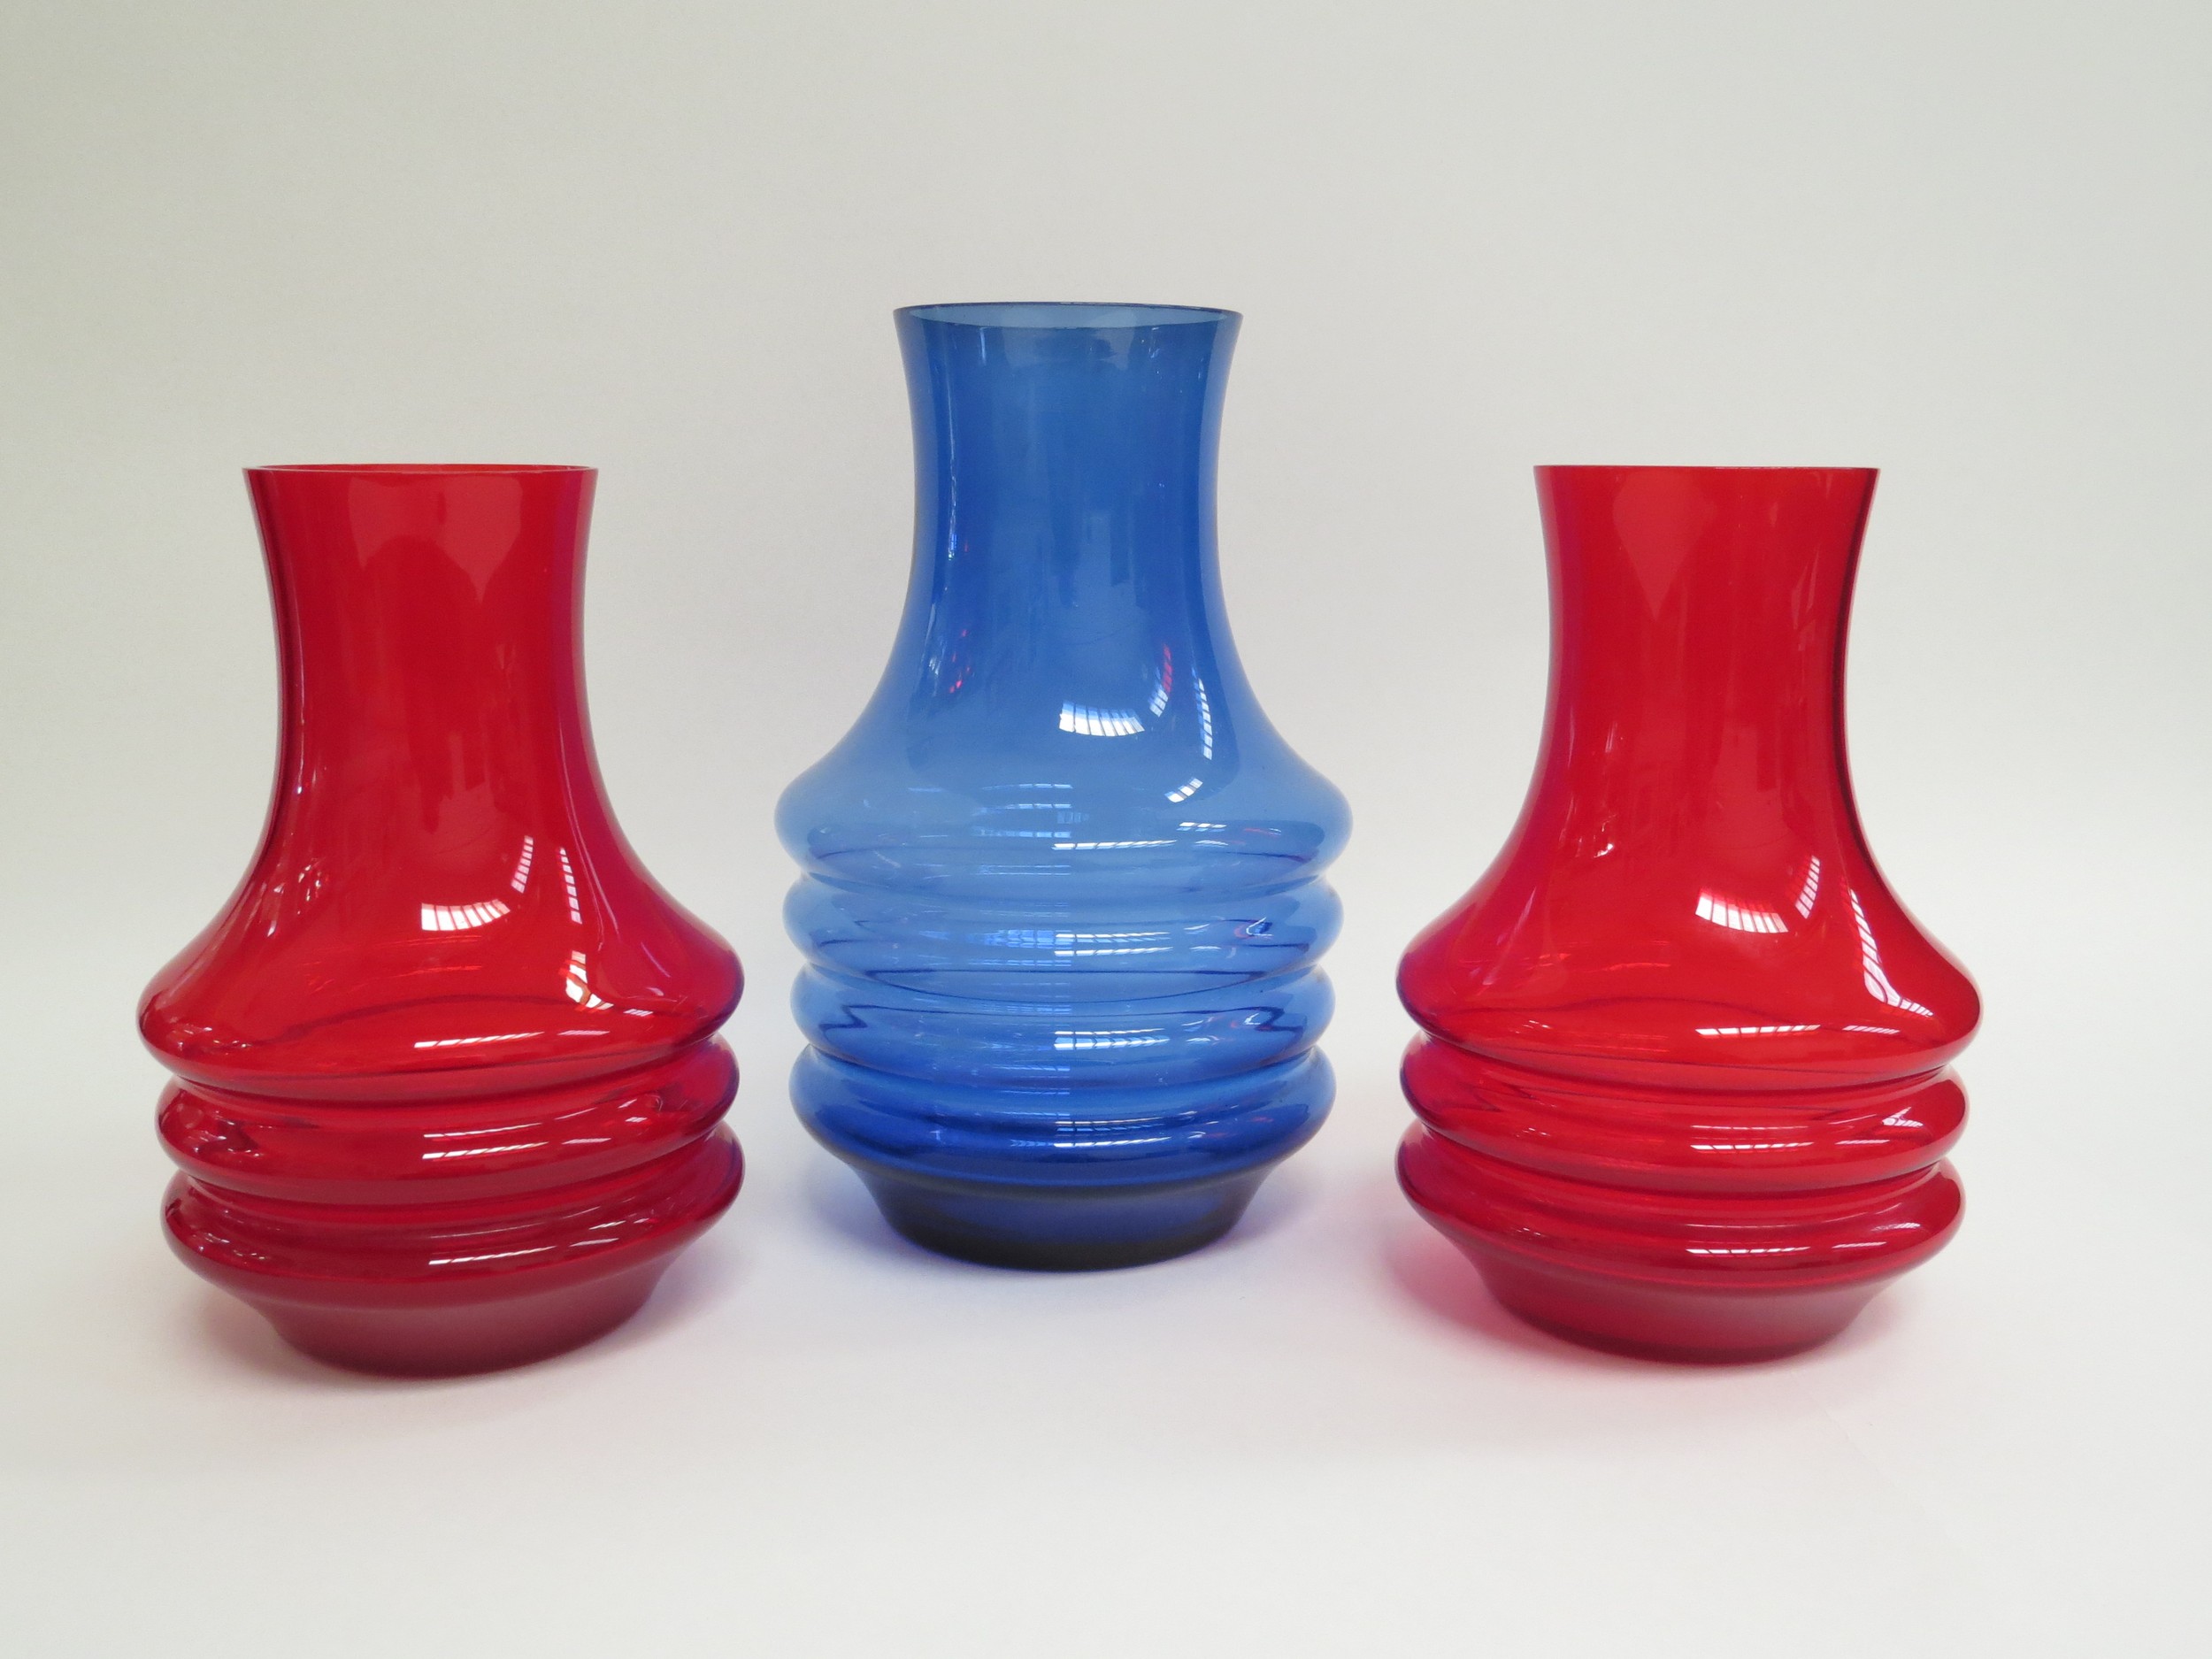 Three Riihimaki Finnish glass vases, each with hooped mid section body, largest in blue and a pair